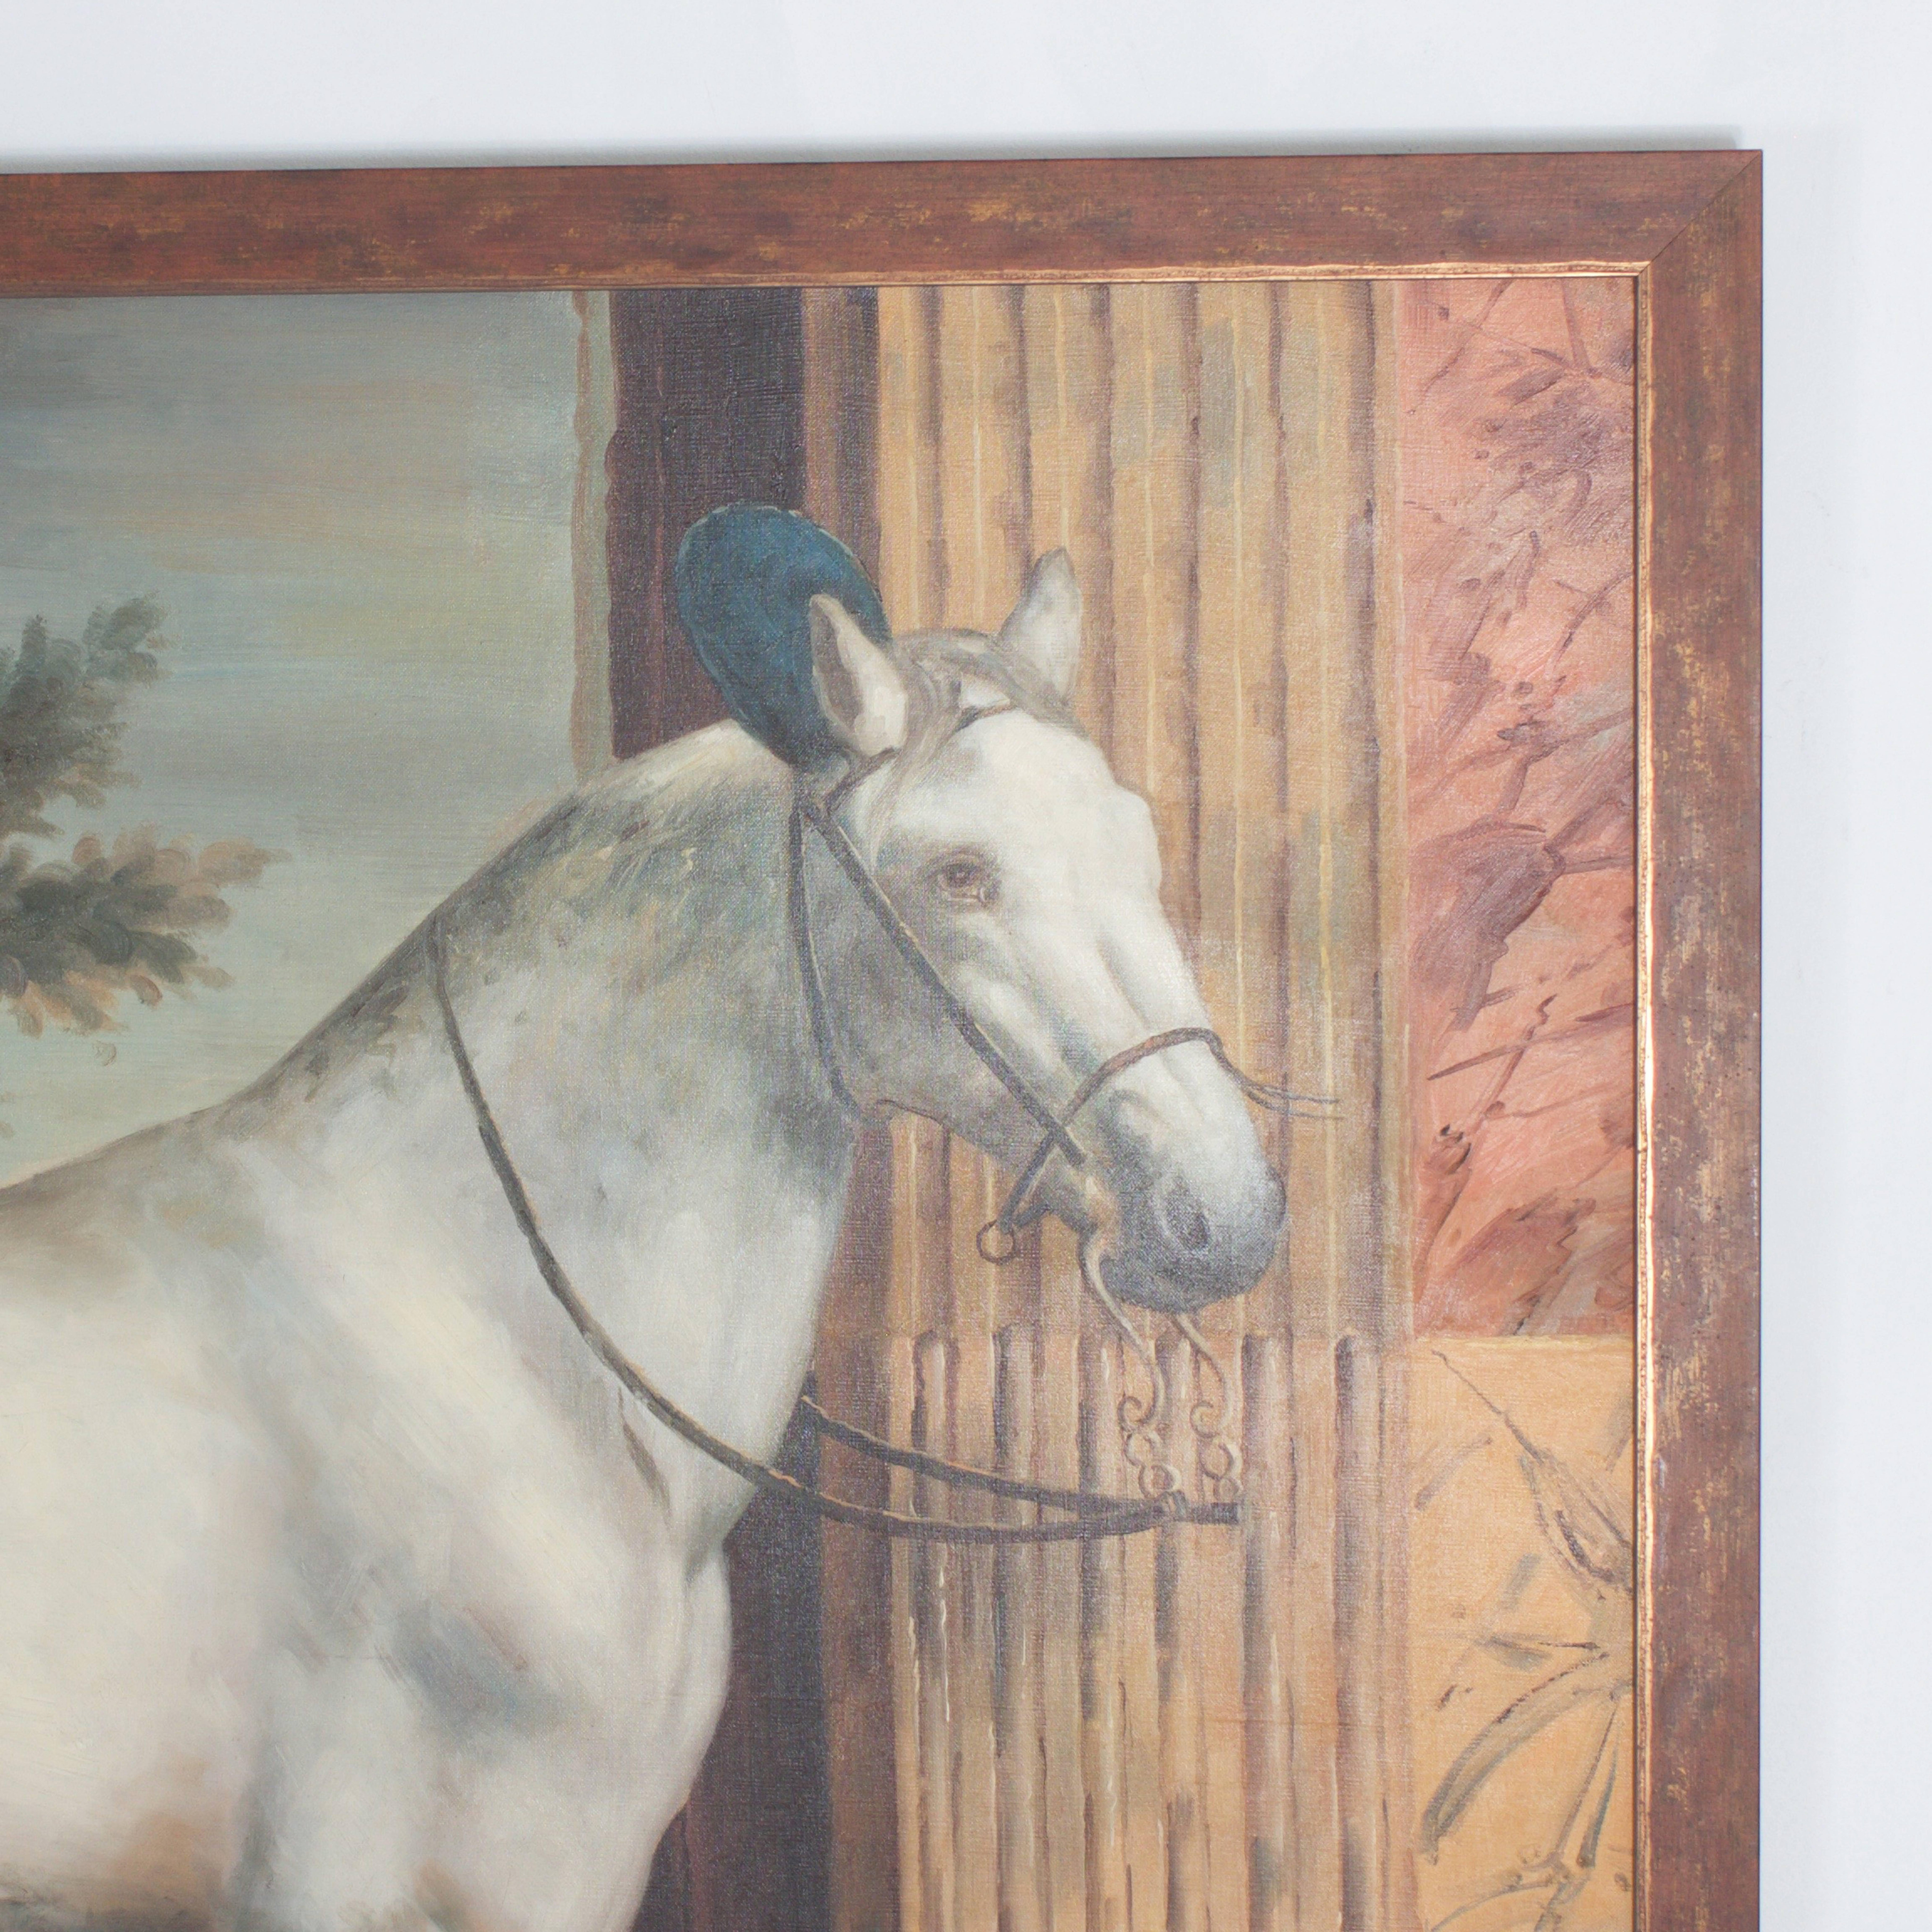 Evocative mid century oil painting on canvas of a white horse standing in front of classical fluted columns set in front of a pastoral scene. Classical composition, but with a modern twist.